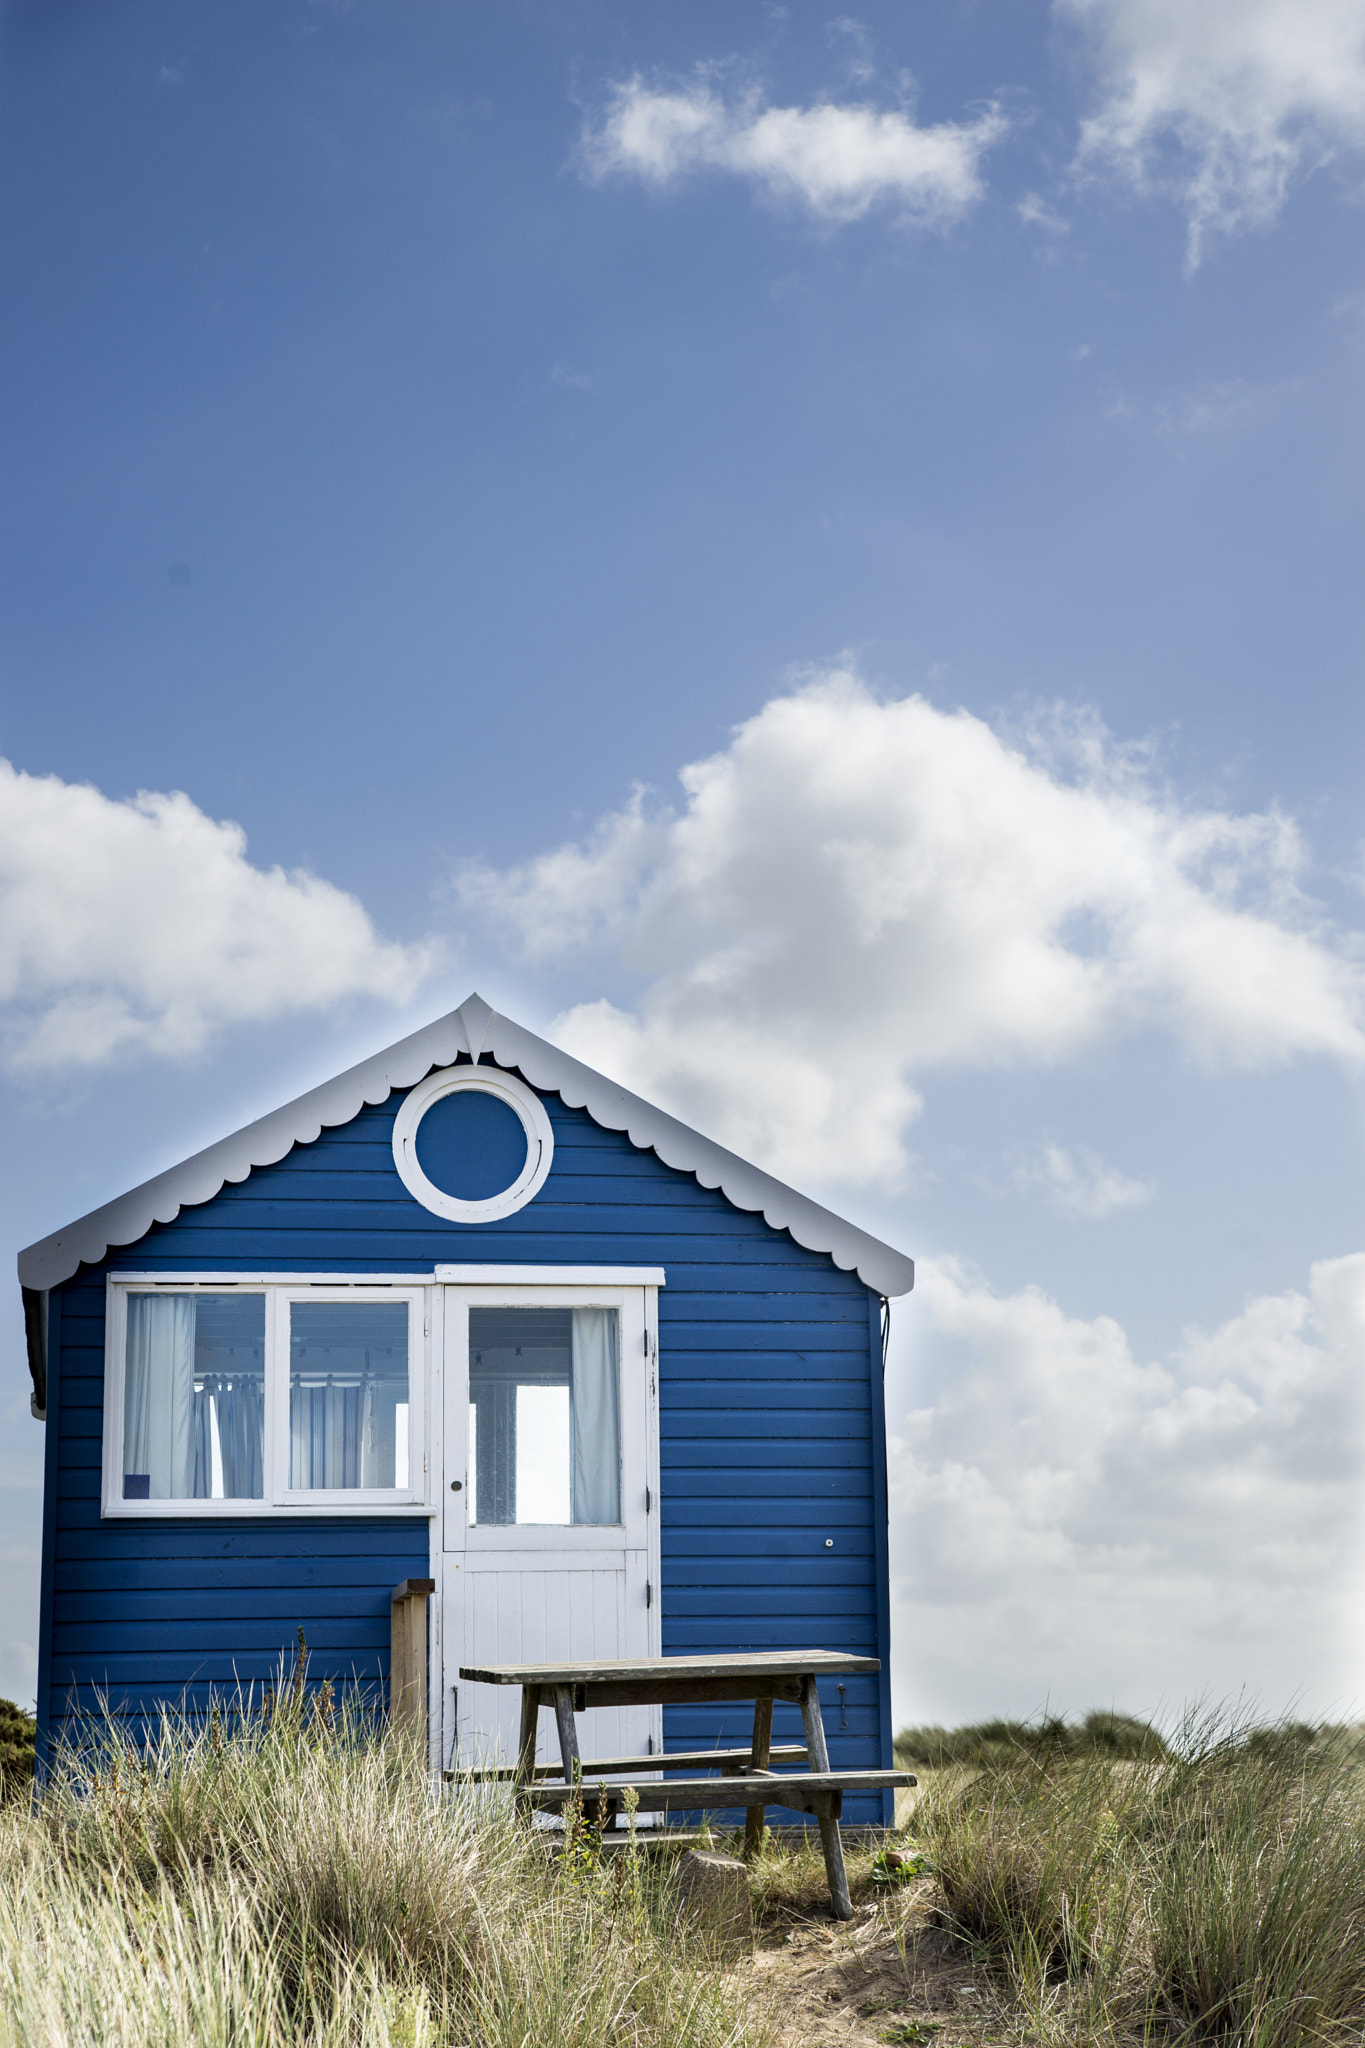 Tamron AF 28-75mm F2.8 XR Di LD Aspherical (IF) sample photo. Beach huts photography